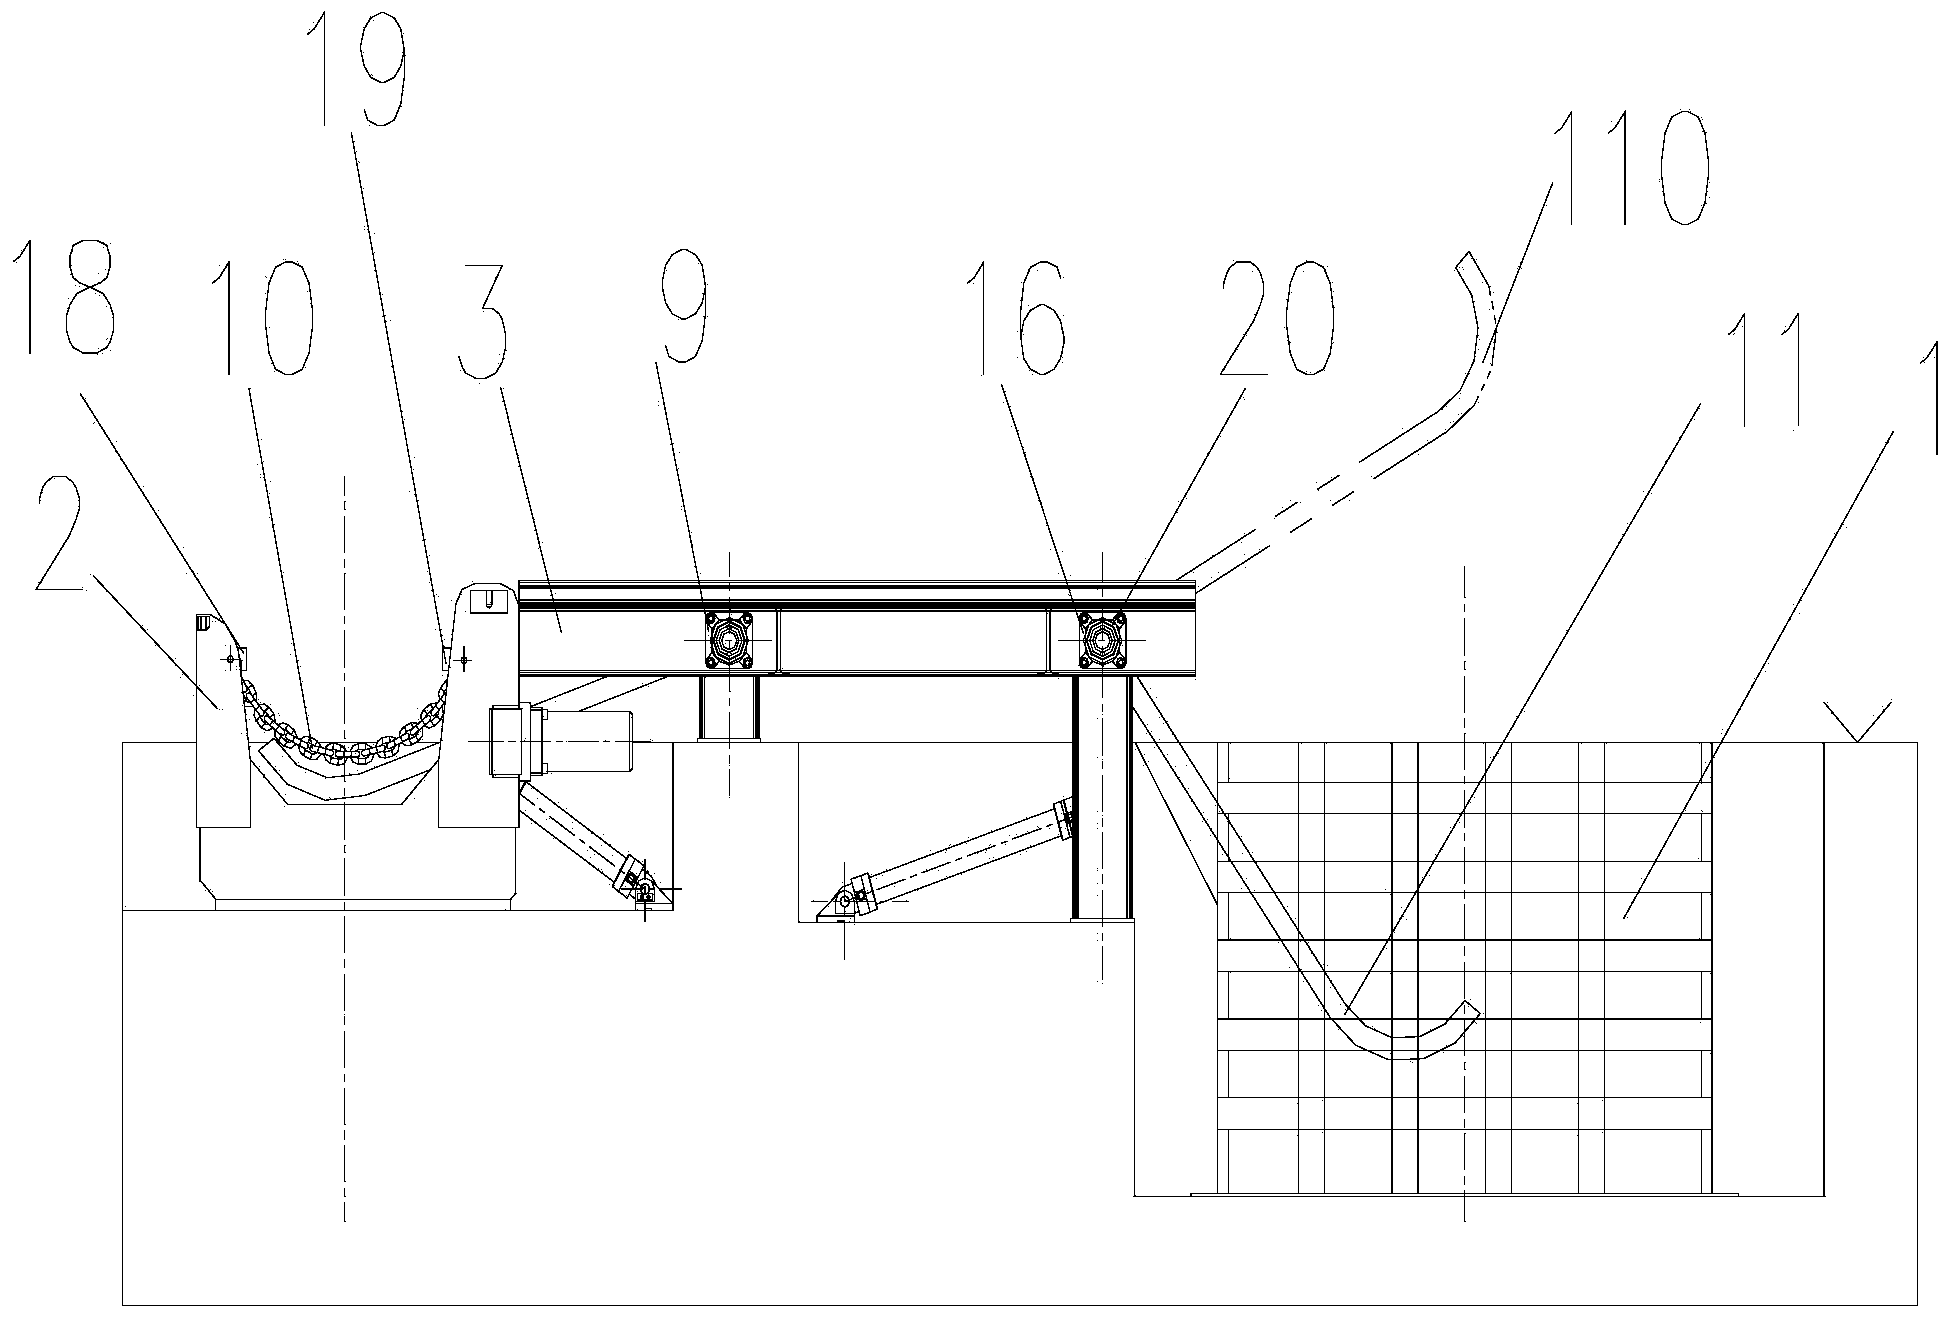 Quenching machine applied to mandrel heat treatment